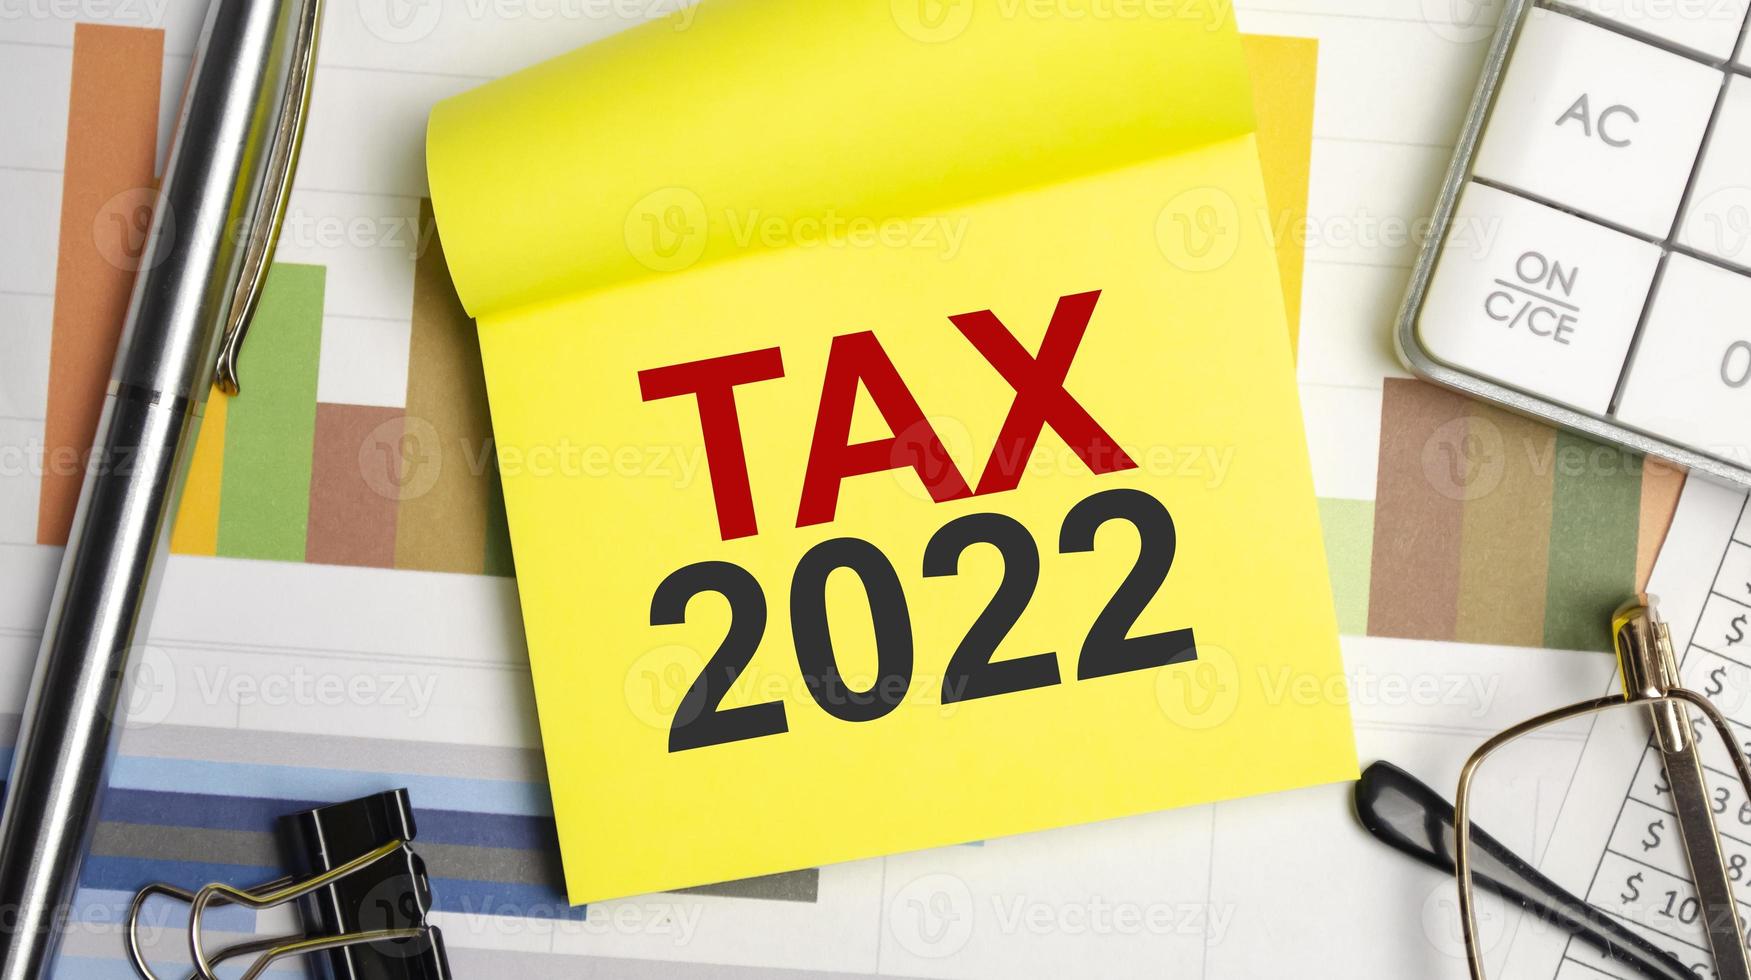 Tax 2022 words on yellows sticker and charts photo